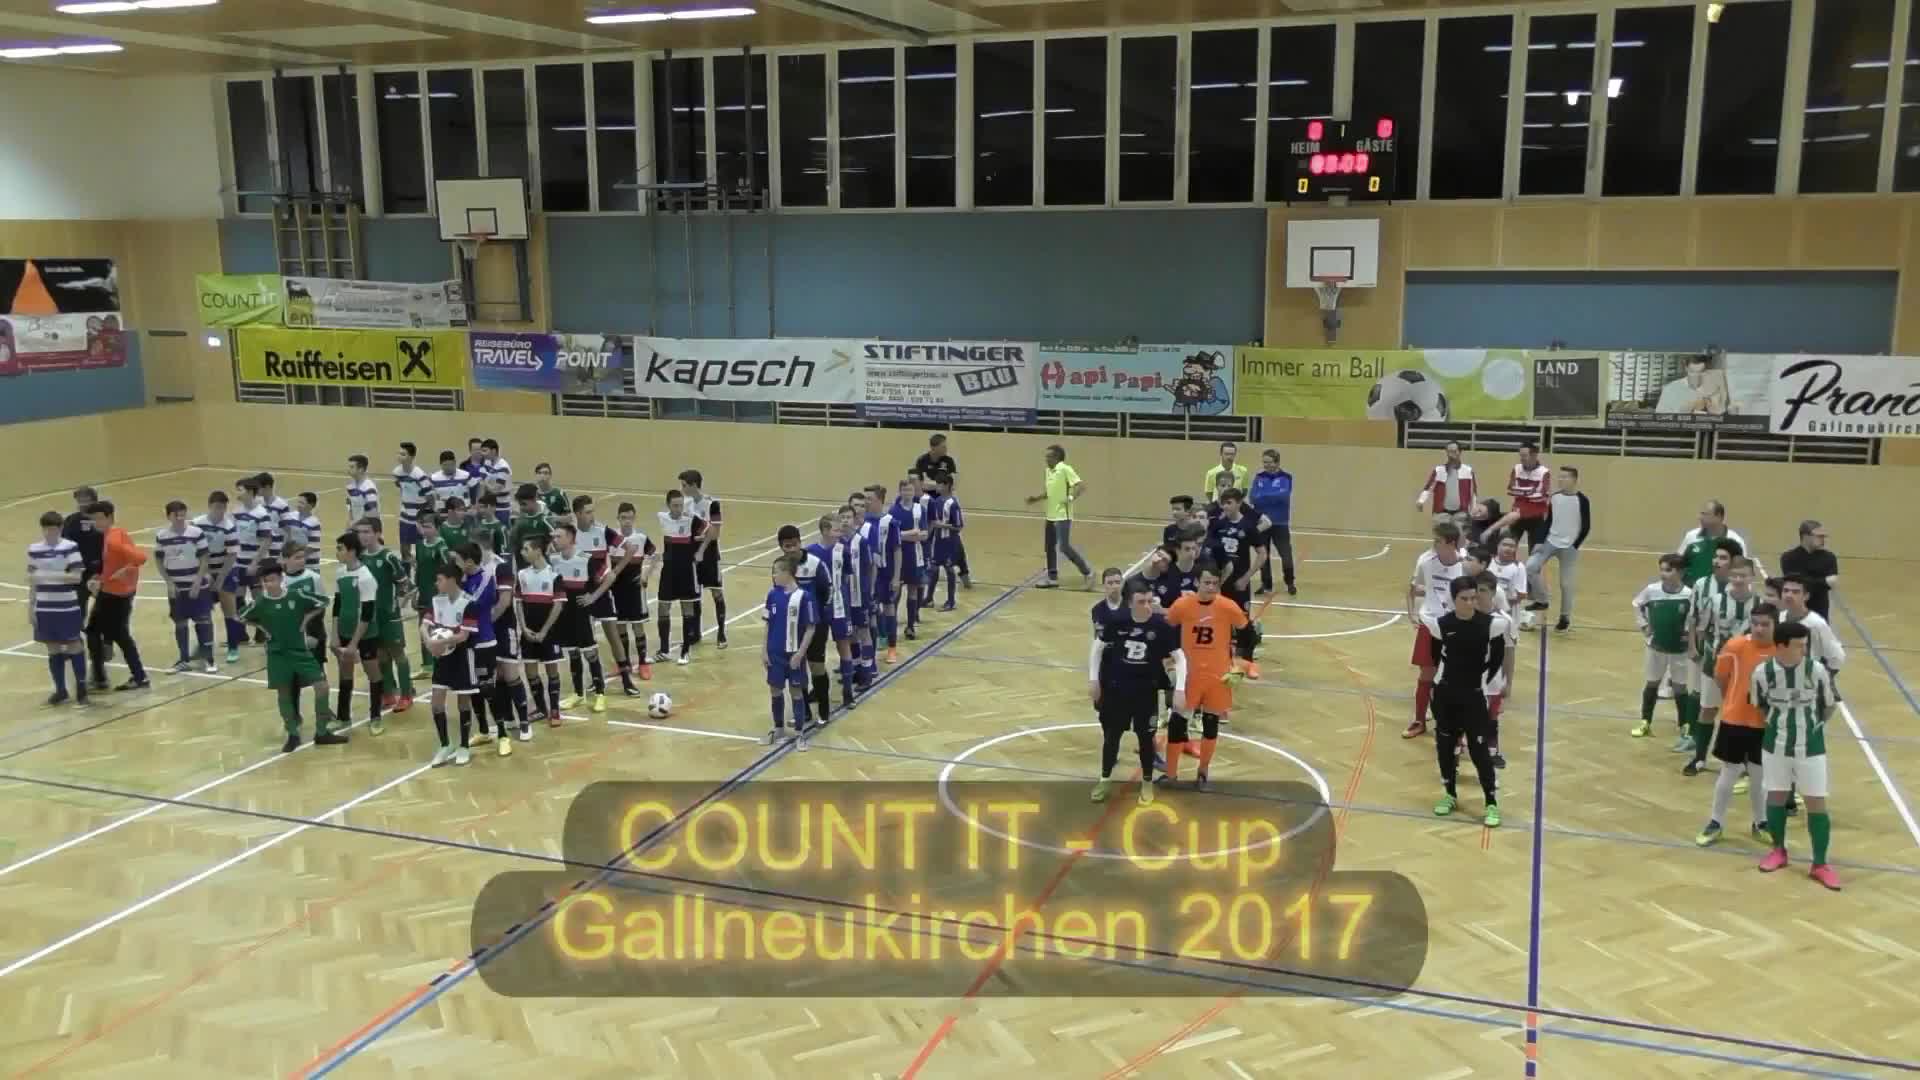 COUNT IT Cup in Gallneukirchen